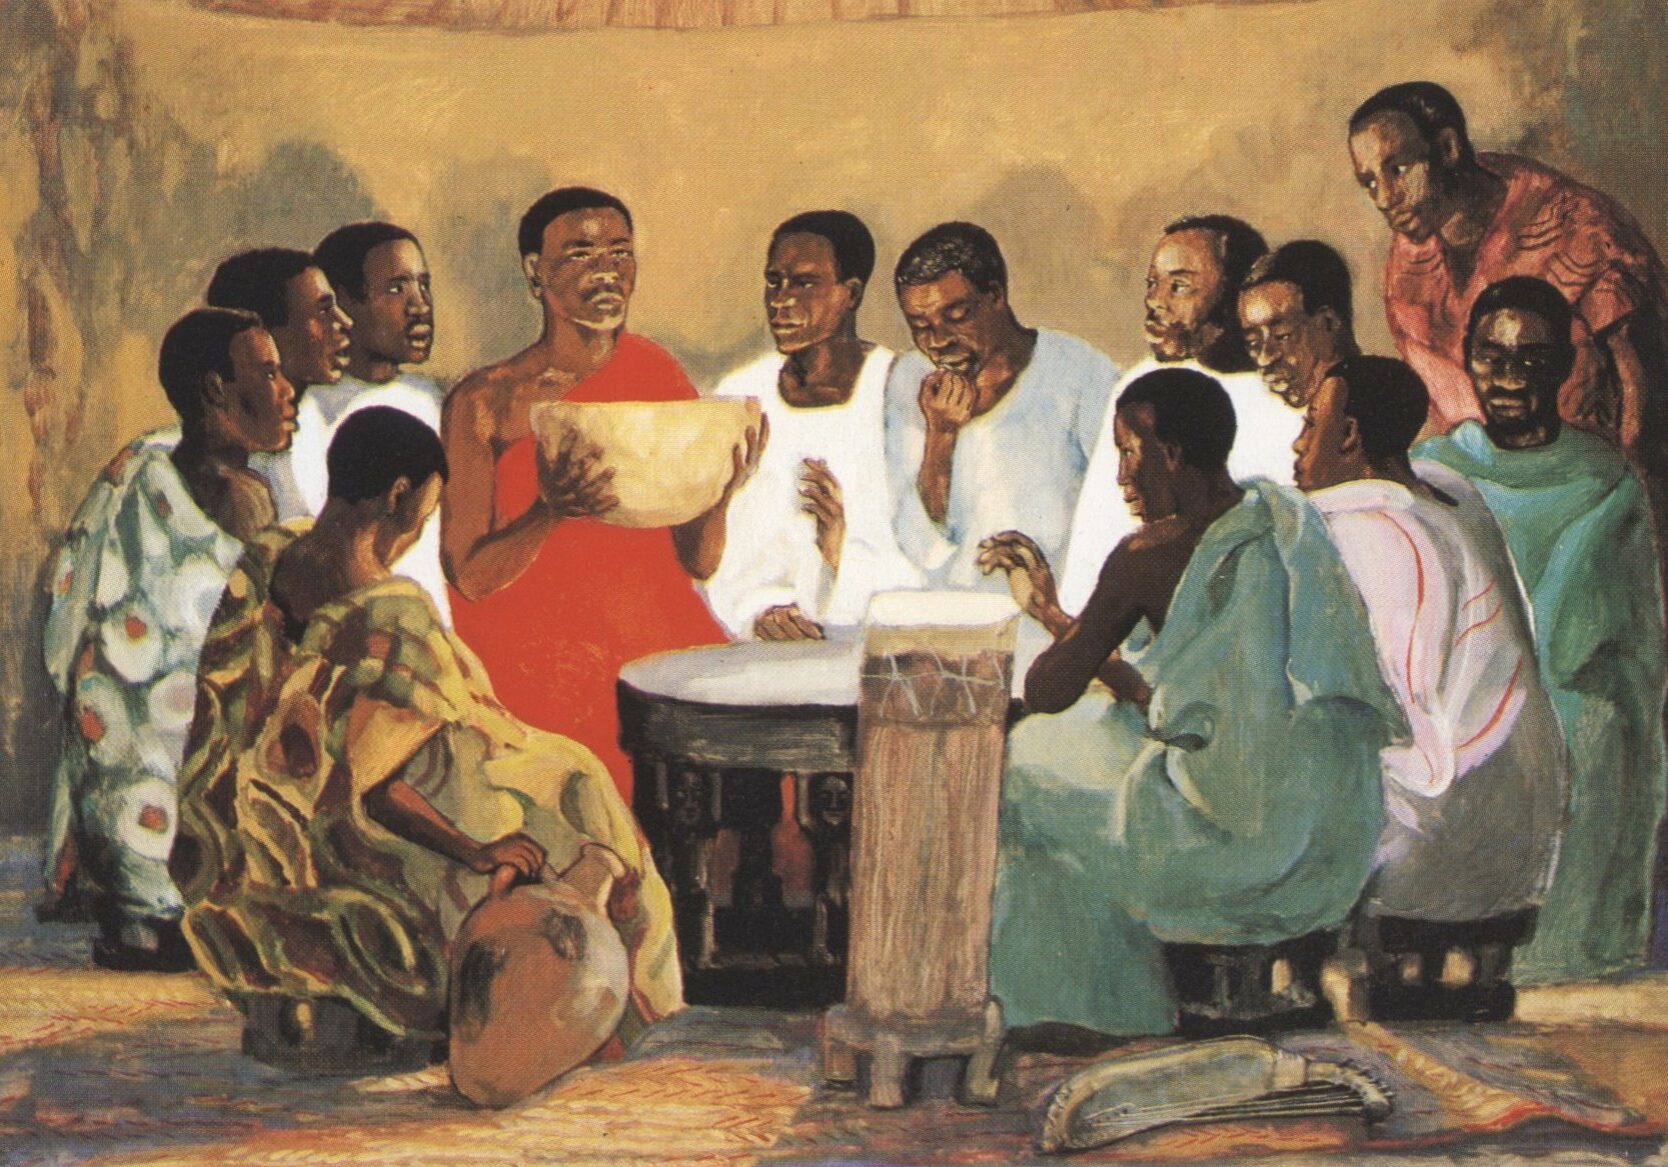 The Lord's Supper - Matthew 26:17-30